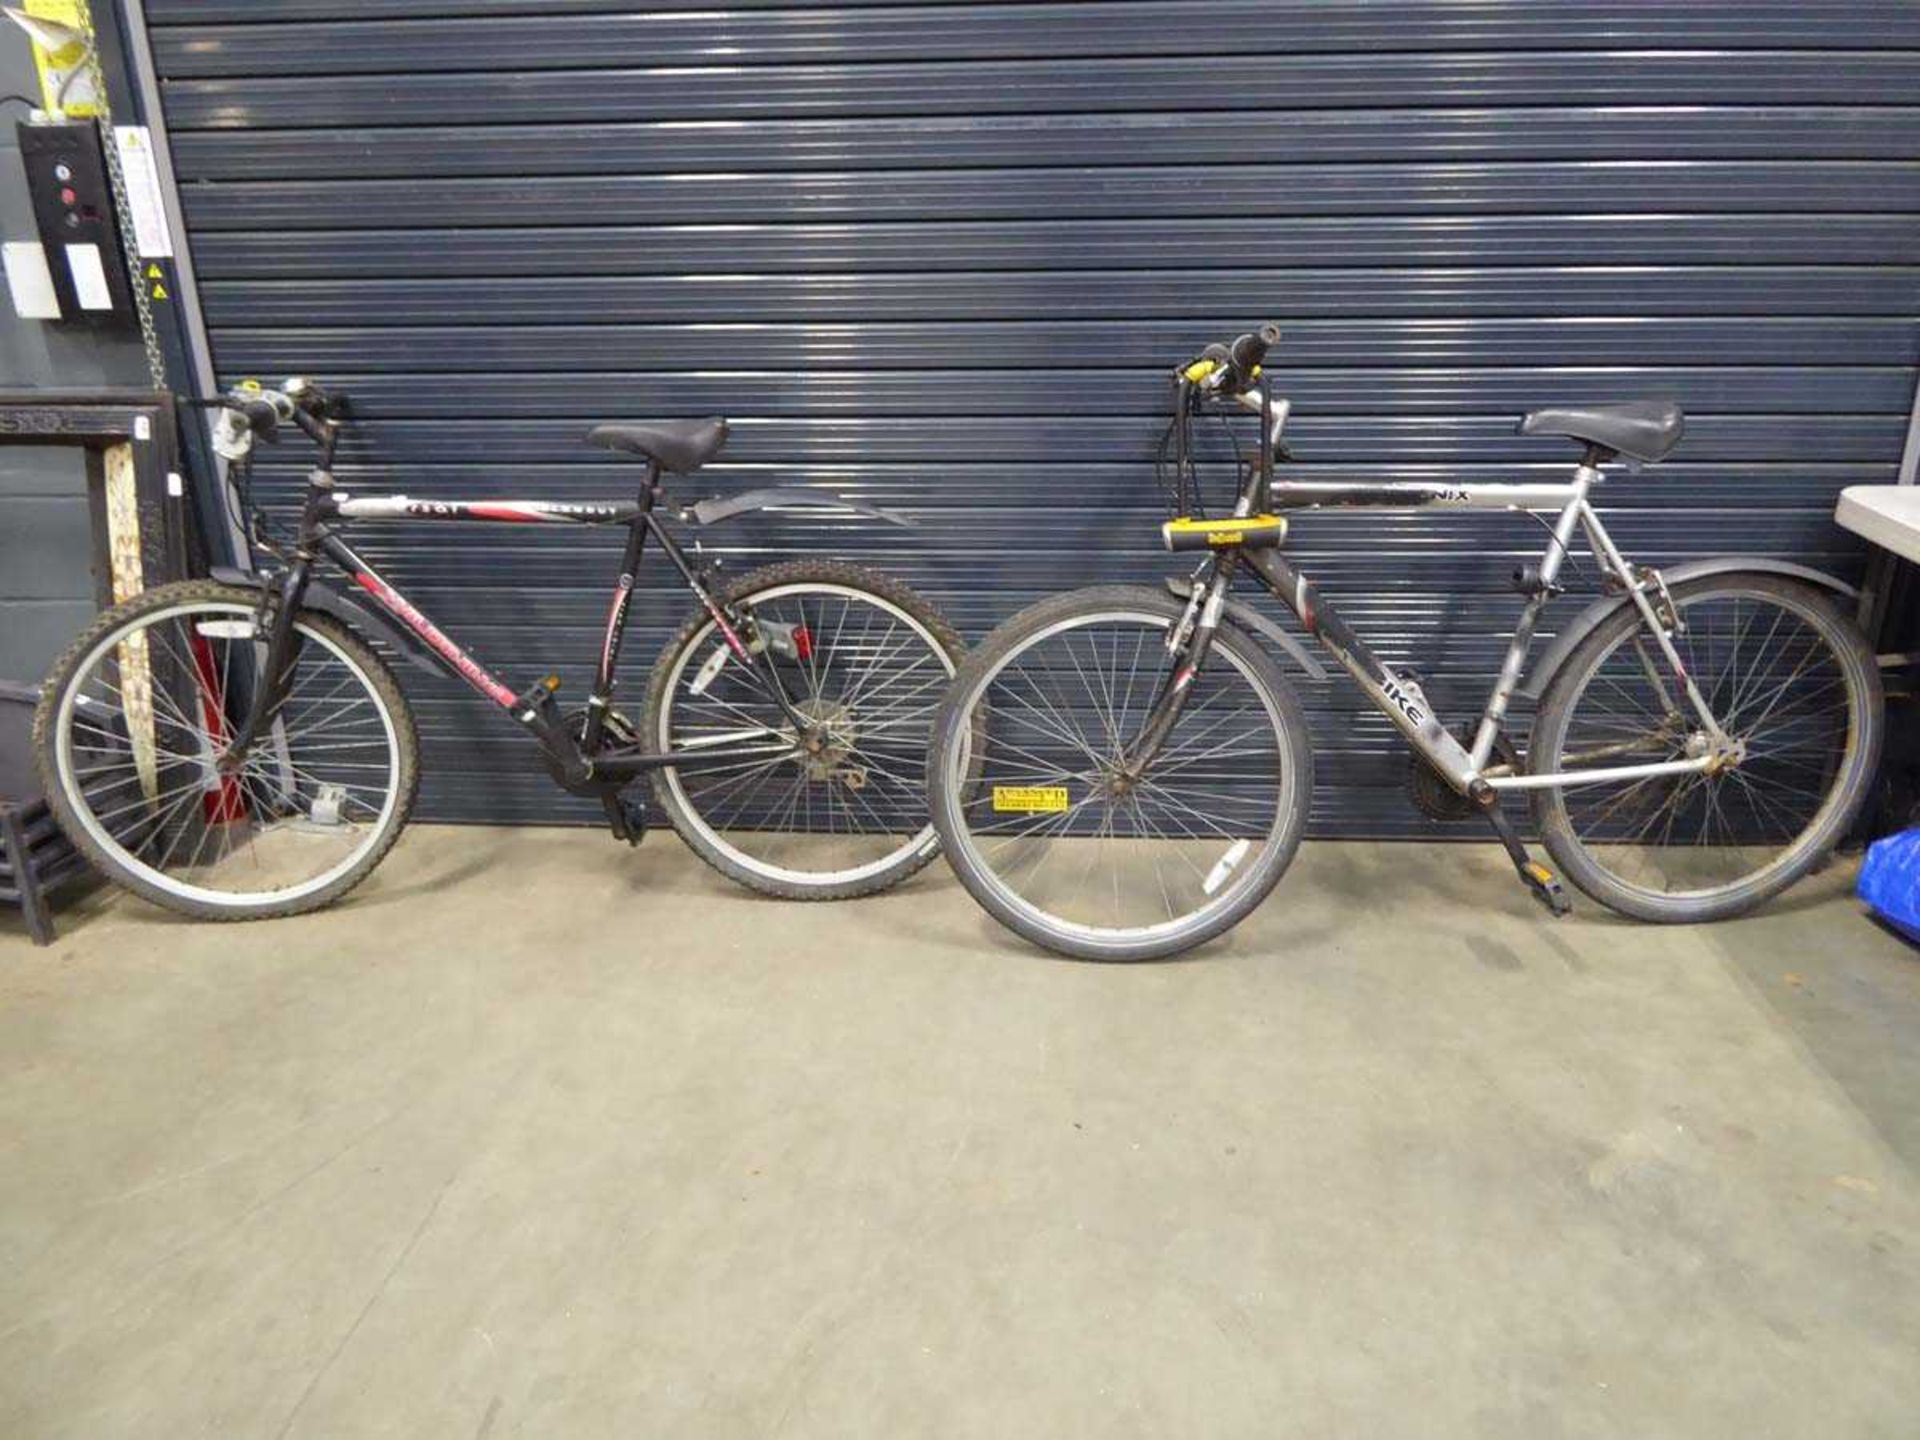 Two gents bikes, one black and one silver